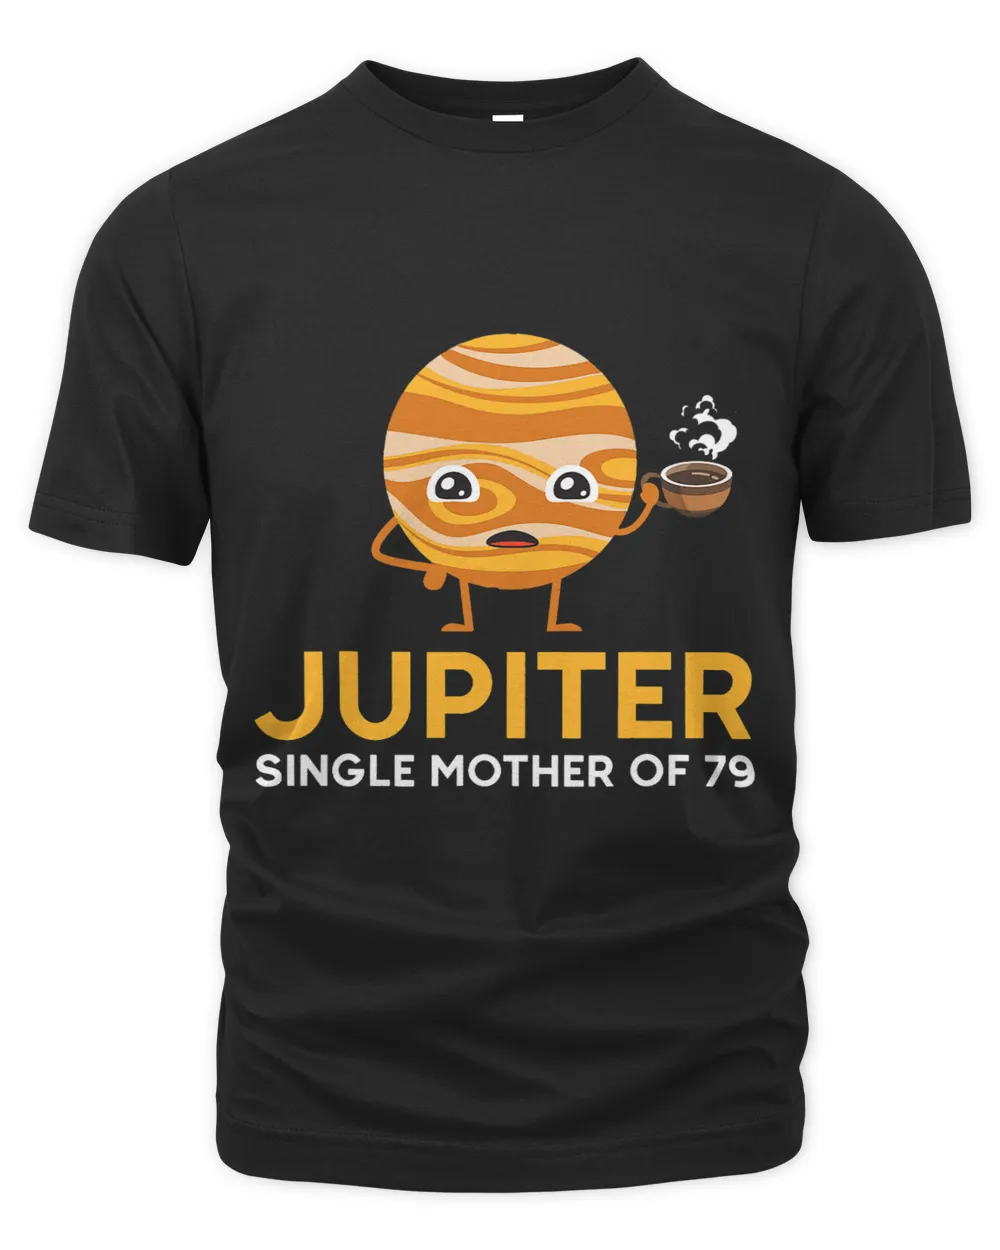 Jupiter Single Mother of 79 Astronomy Physics Science